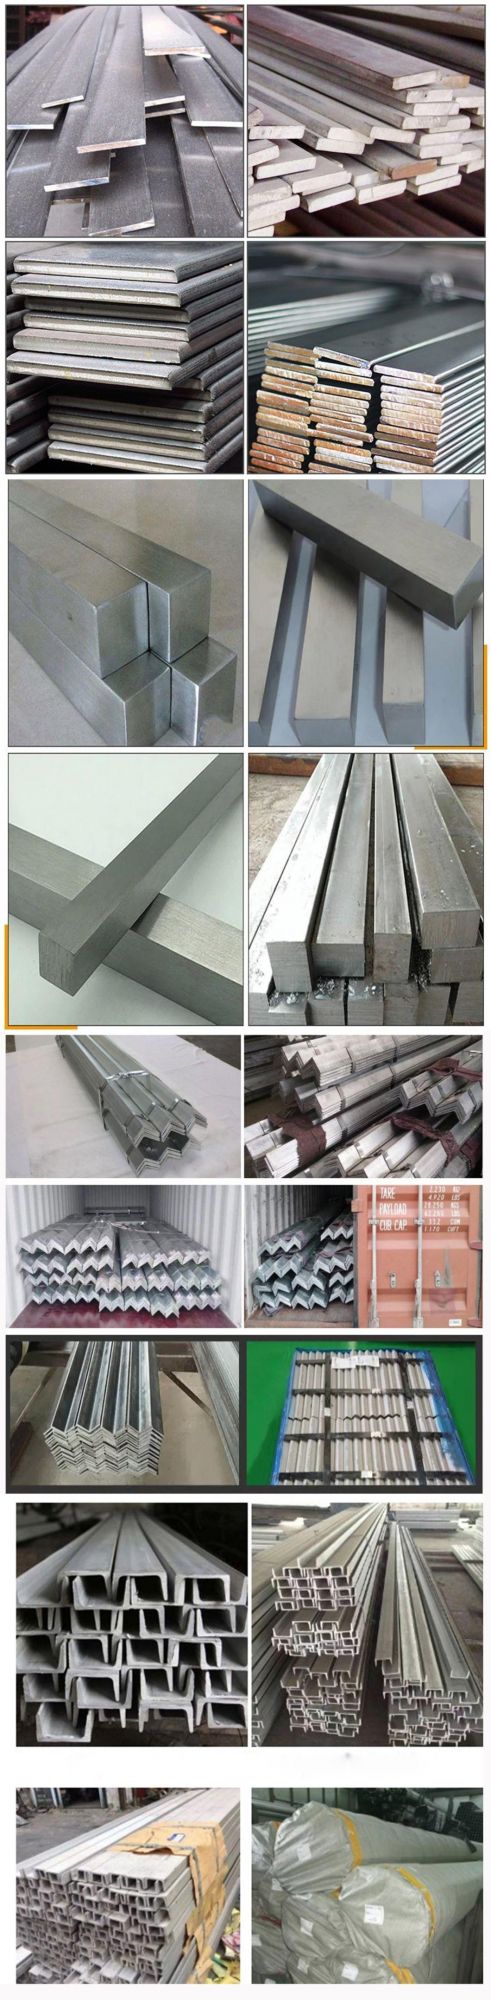 Cr12Mo1V1 AISI D2 DIN 1.2379 JIS SKD11 High Speed Steel Tool Steel Forged Steel Square Bar